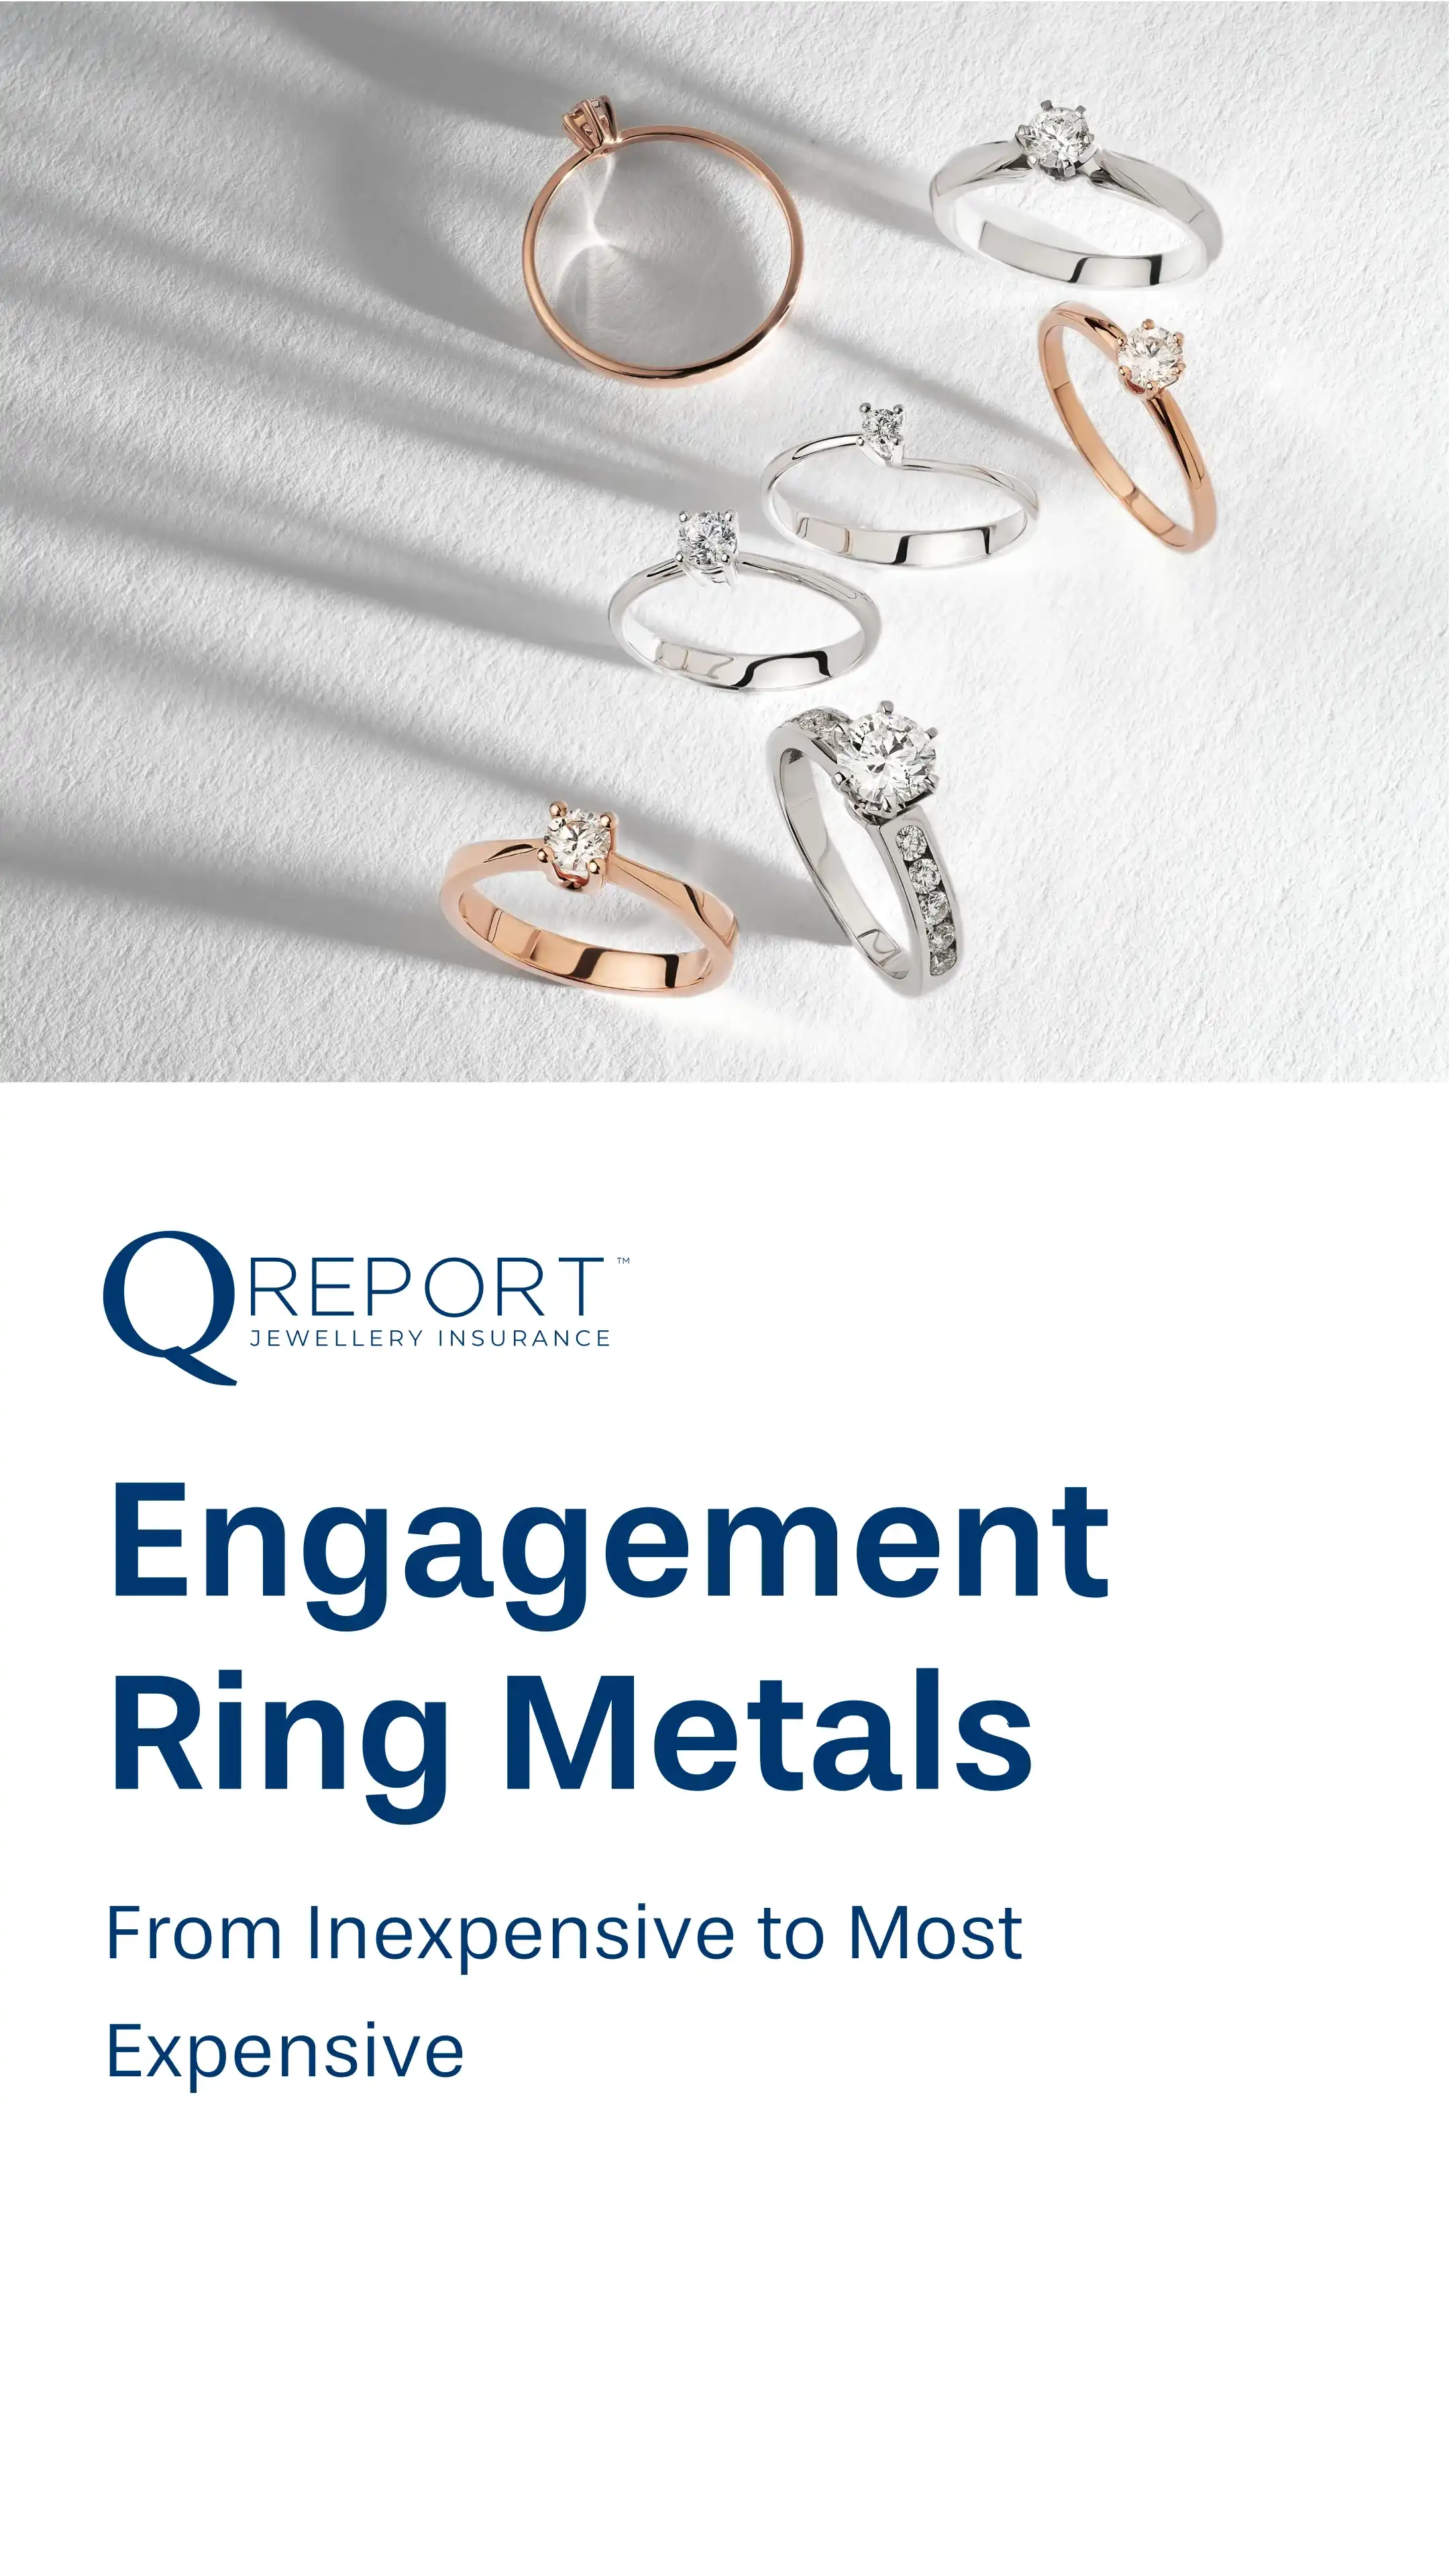 Engagement Ring Metals - From Inexpensive to Most Expensive